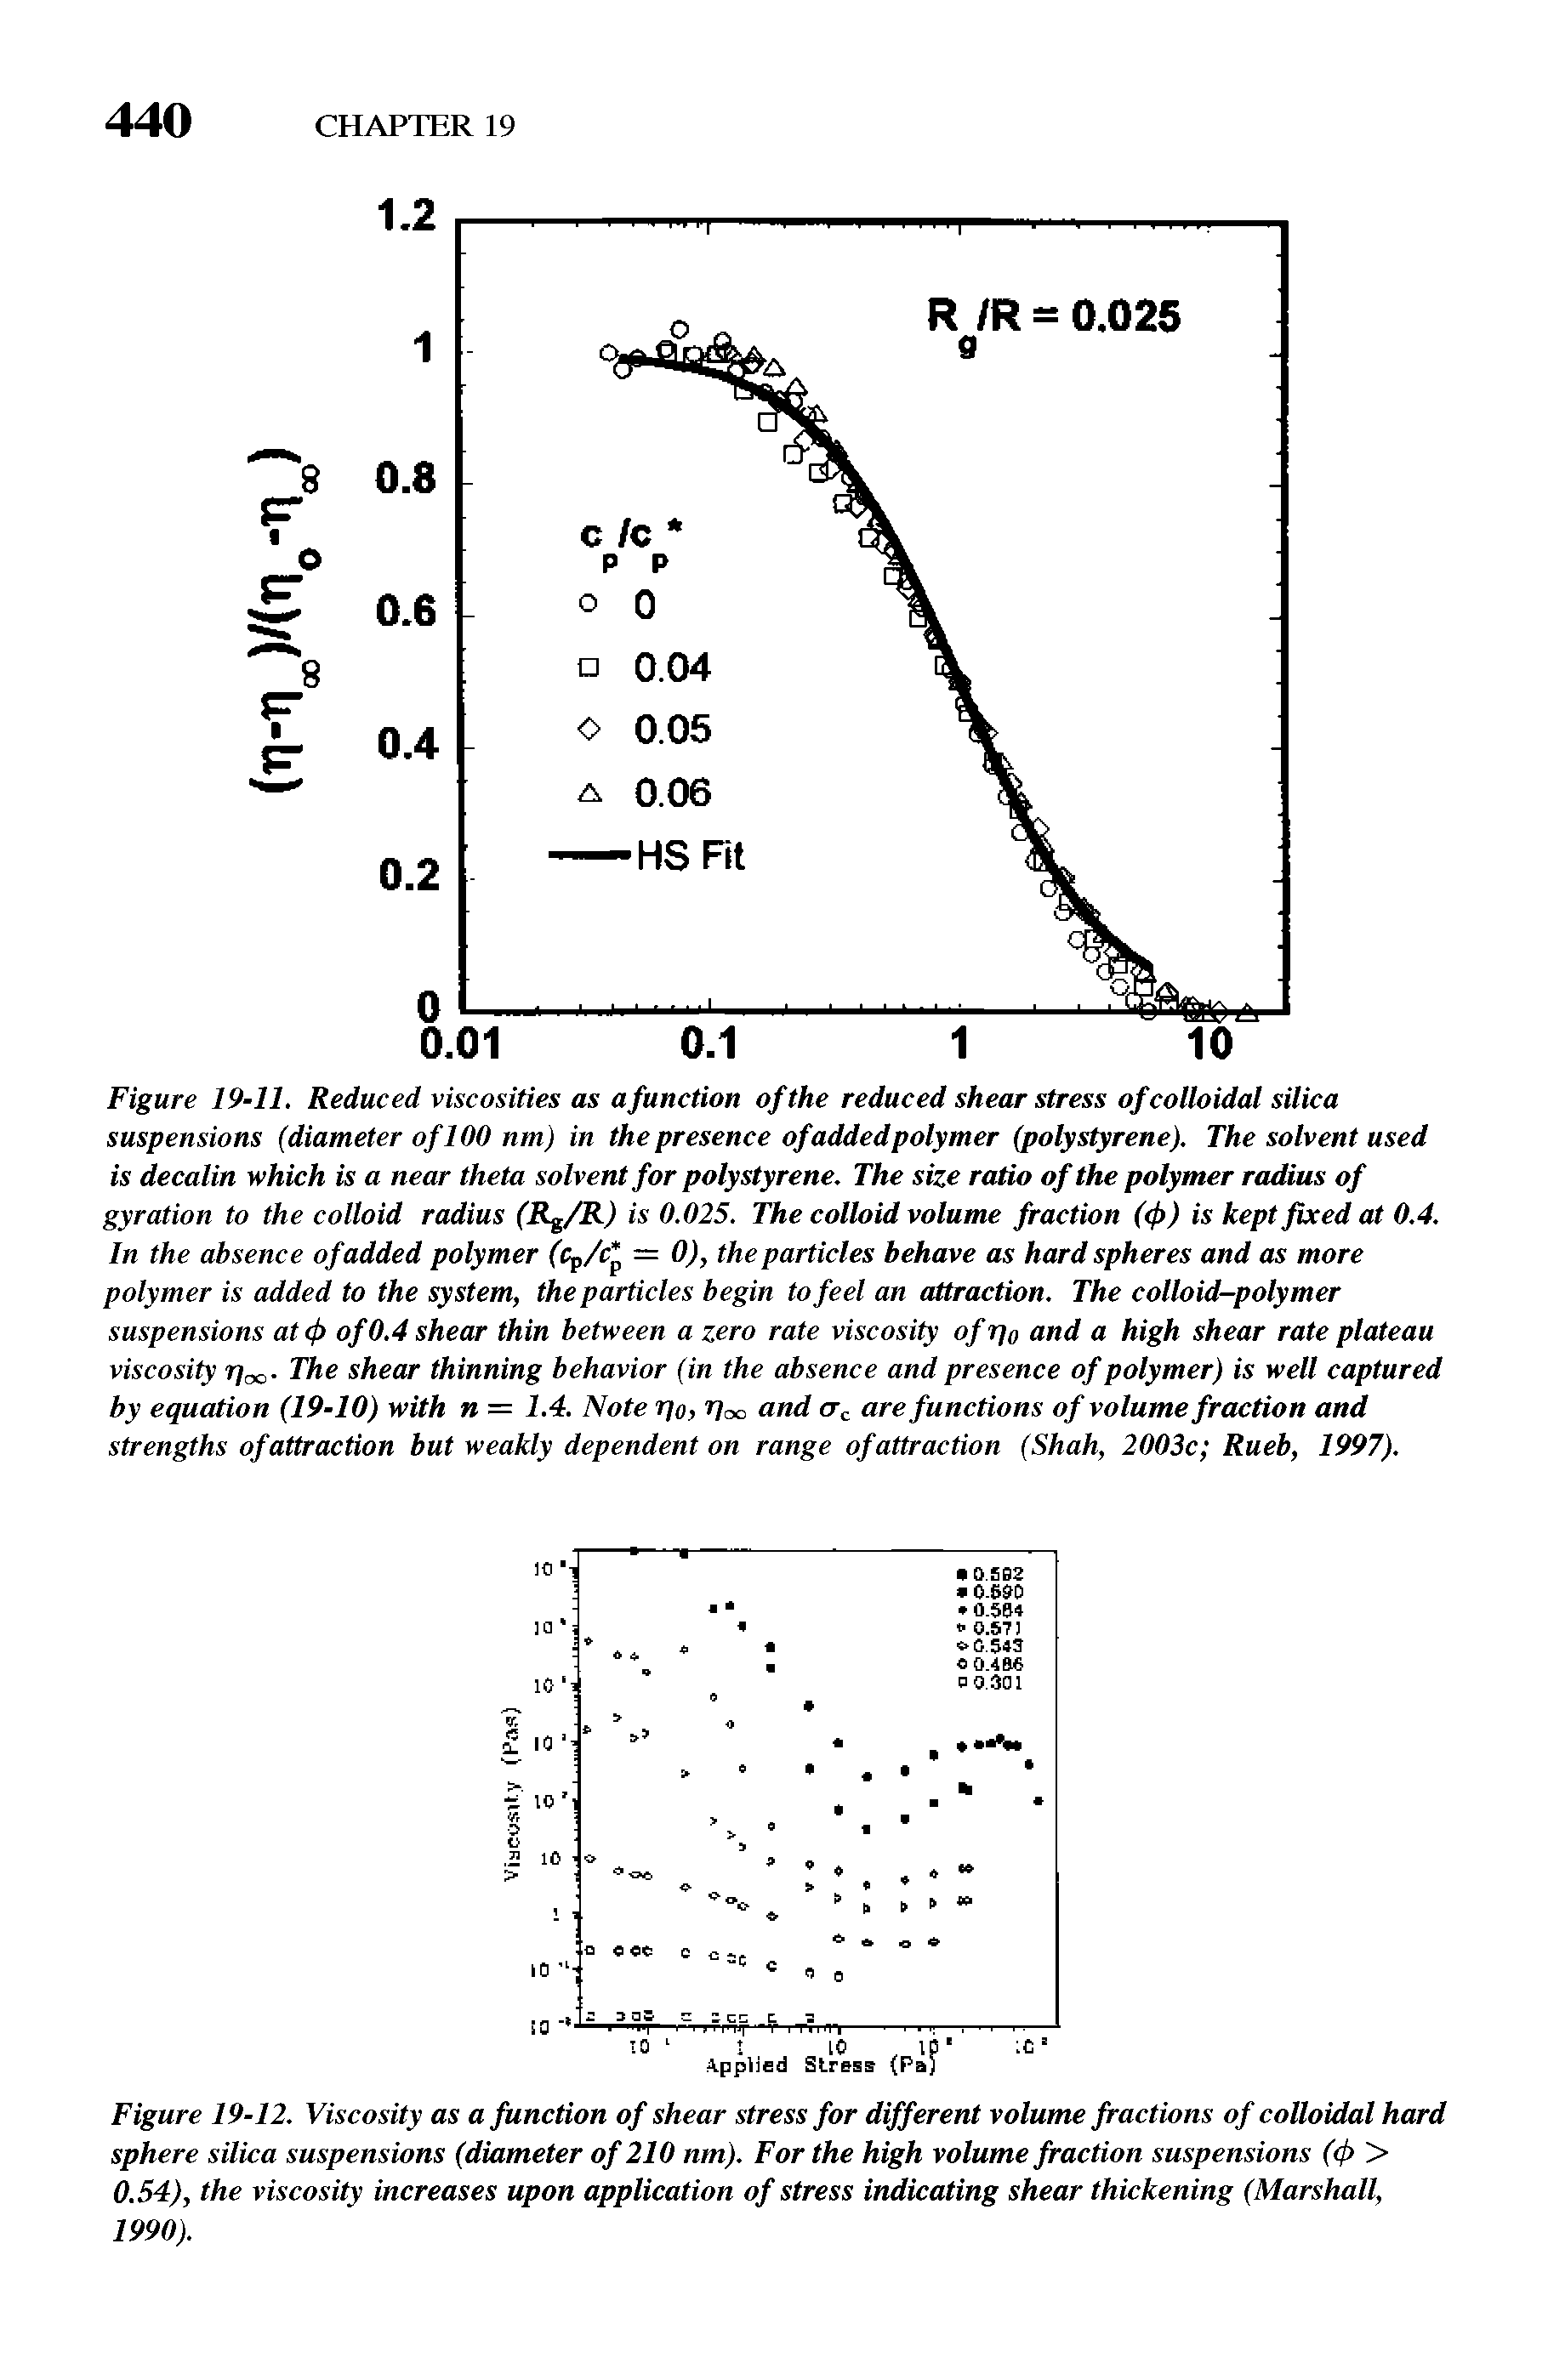 Figure 19-11. Reduced viscosities as a function of the reduced shear stress of colloidal silica suspensions (diameter of 100 nm) in the presence of addedpolymer (polystyrene). The solvent used is decalin which is a near theta solvent for polystyrene. The size ratio of the polymer radius of gyration to the colloid radius (Rg/R) is 0.02S. The colloid volume fraction ((f>) is kept fixed at 0.4. In the absence of added polymer (Cp/c = 0), the particles behave as hard spheres and as more polymer is added to the system, the particles begin to feel an attraction. The colloid-polymer suspensions at (p of 0.4 shear thin between a zero rate viscosity of r o and a high shear rate plateau viscosity r]x,. The shear thinning behavior (in the absence and presence of polymer) is well captured by equation (19-10) with n = 1.4. Note rjo, rjao and cTc are functions of volume fraction and strengths of attraction but weakly dependent on range of attraction (Shah, 2003c Rueb, 1997).